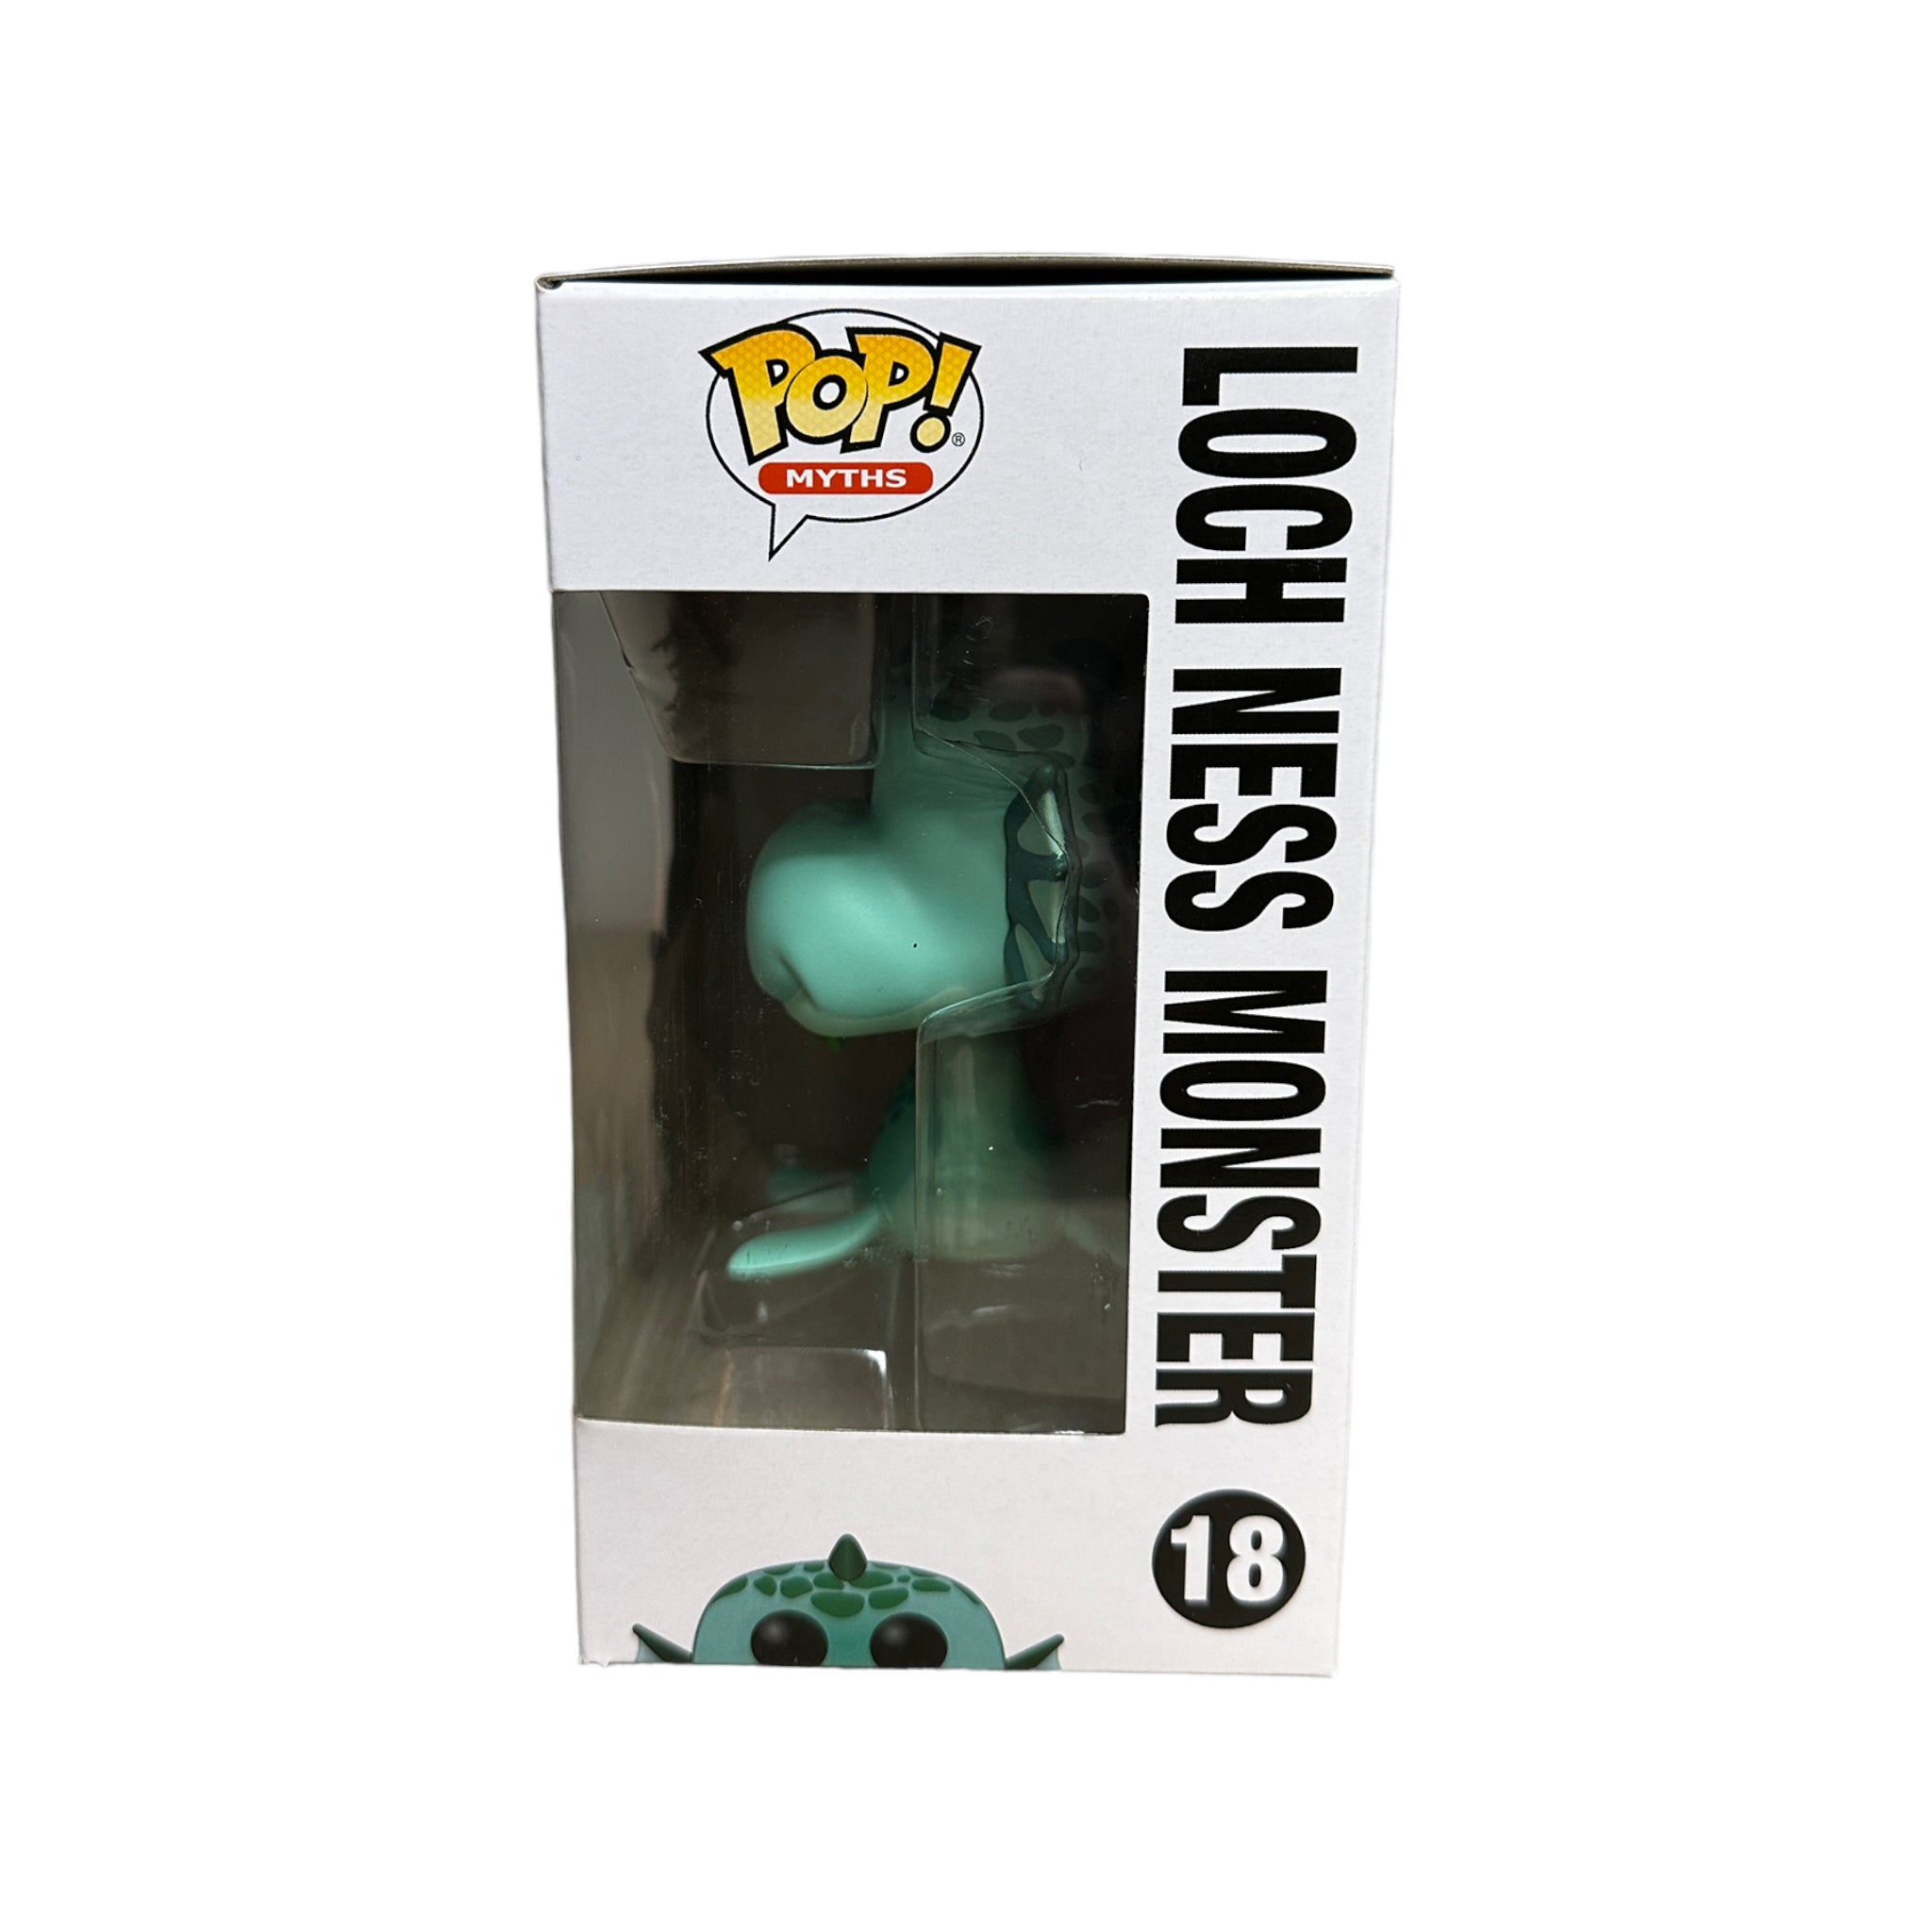 Loch Ness Monster #18 (Glows in the Dark) Funko Pop! - Myths - ECCC 2020 Official Convention Exclusive LE1500 Pcs - Condition 8.75/10